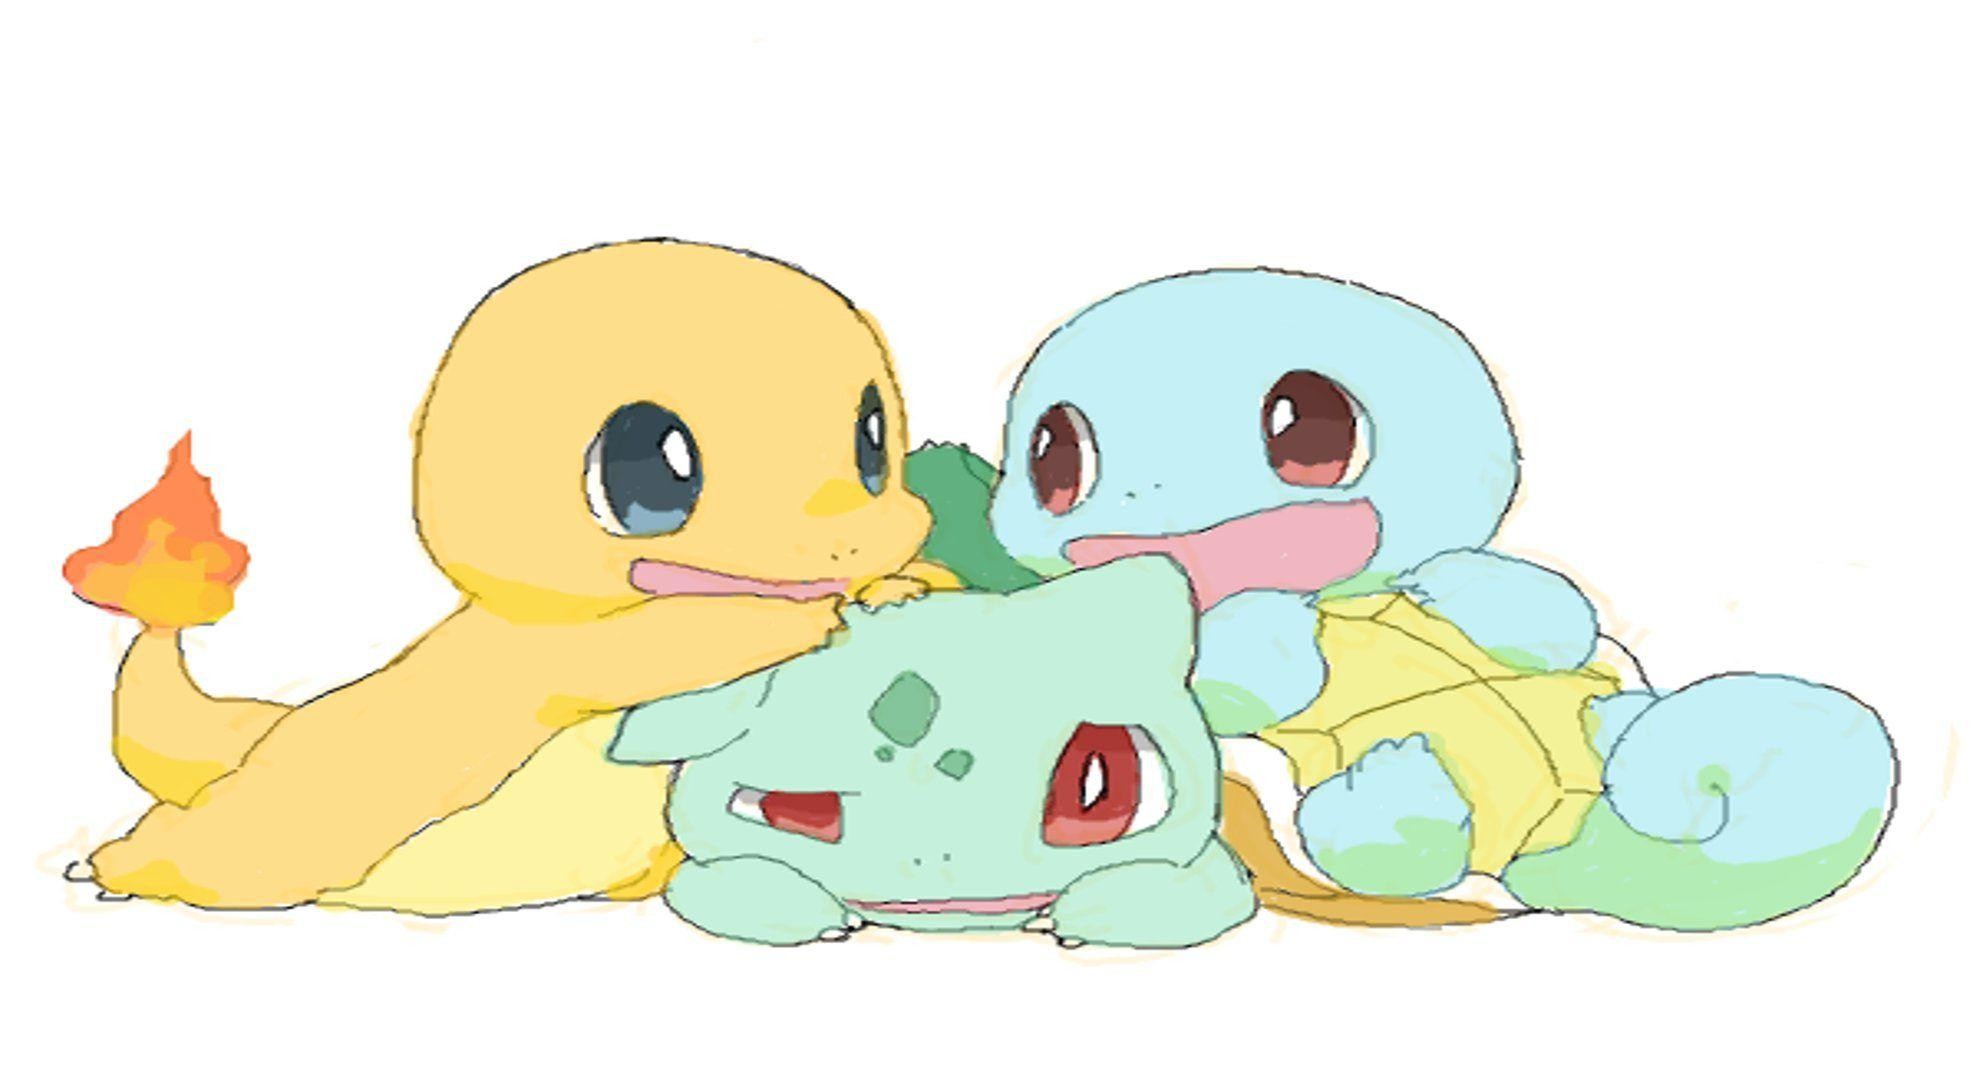 1980x1080 And Squirtle Bulbasaur Charmander Cute Pokemon Squirtle Wallpaper .